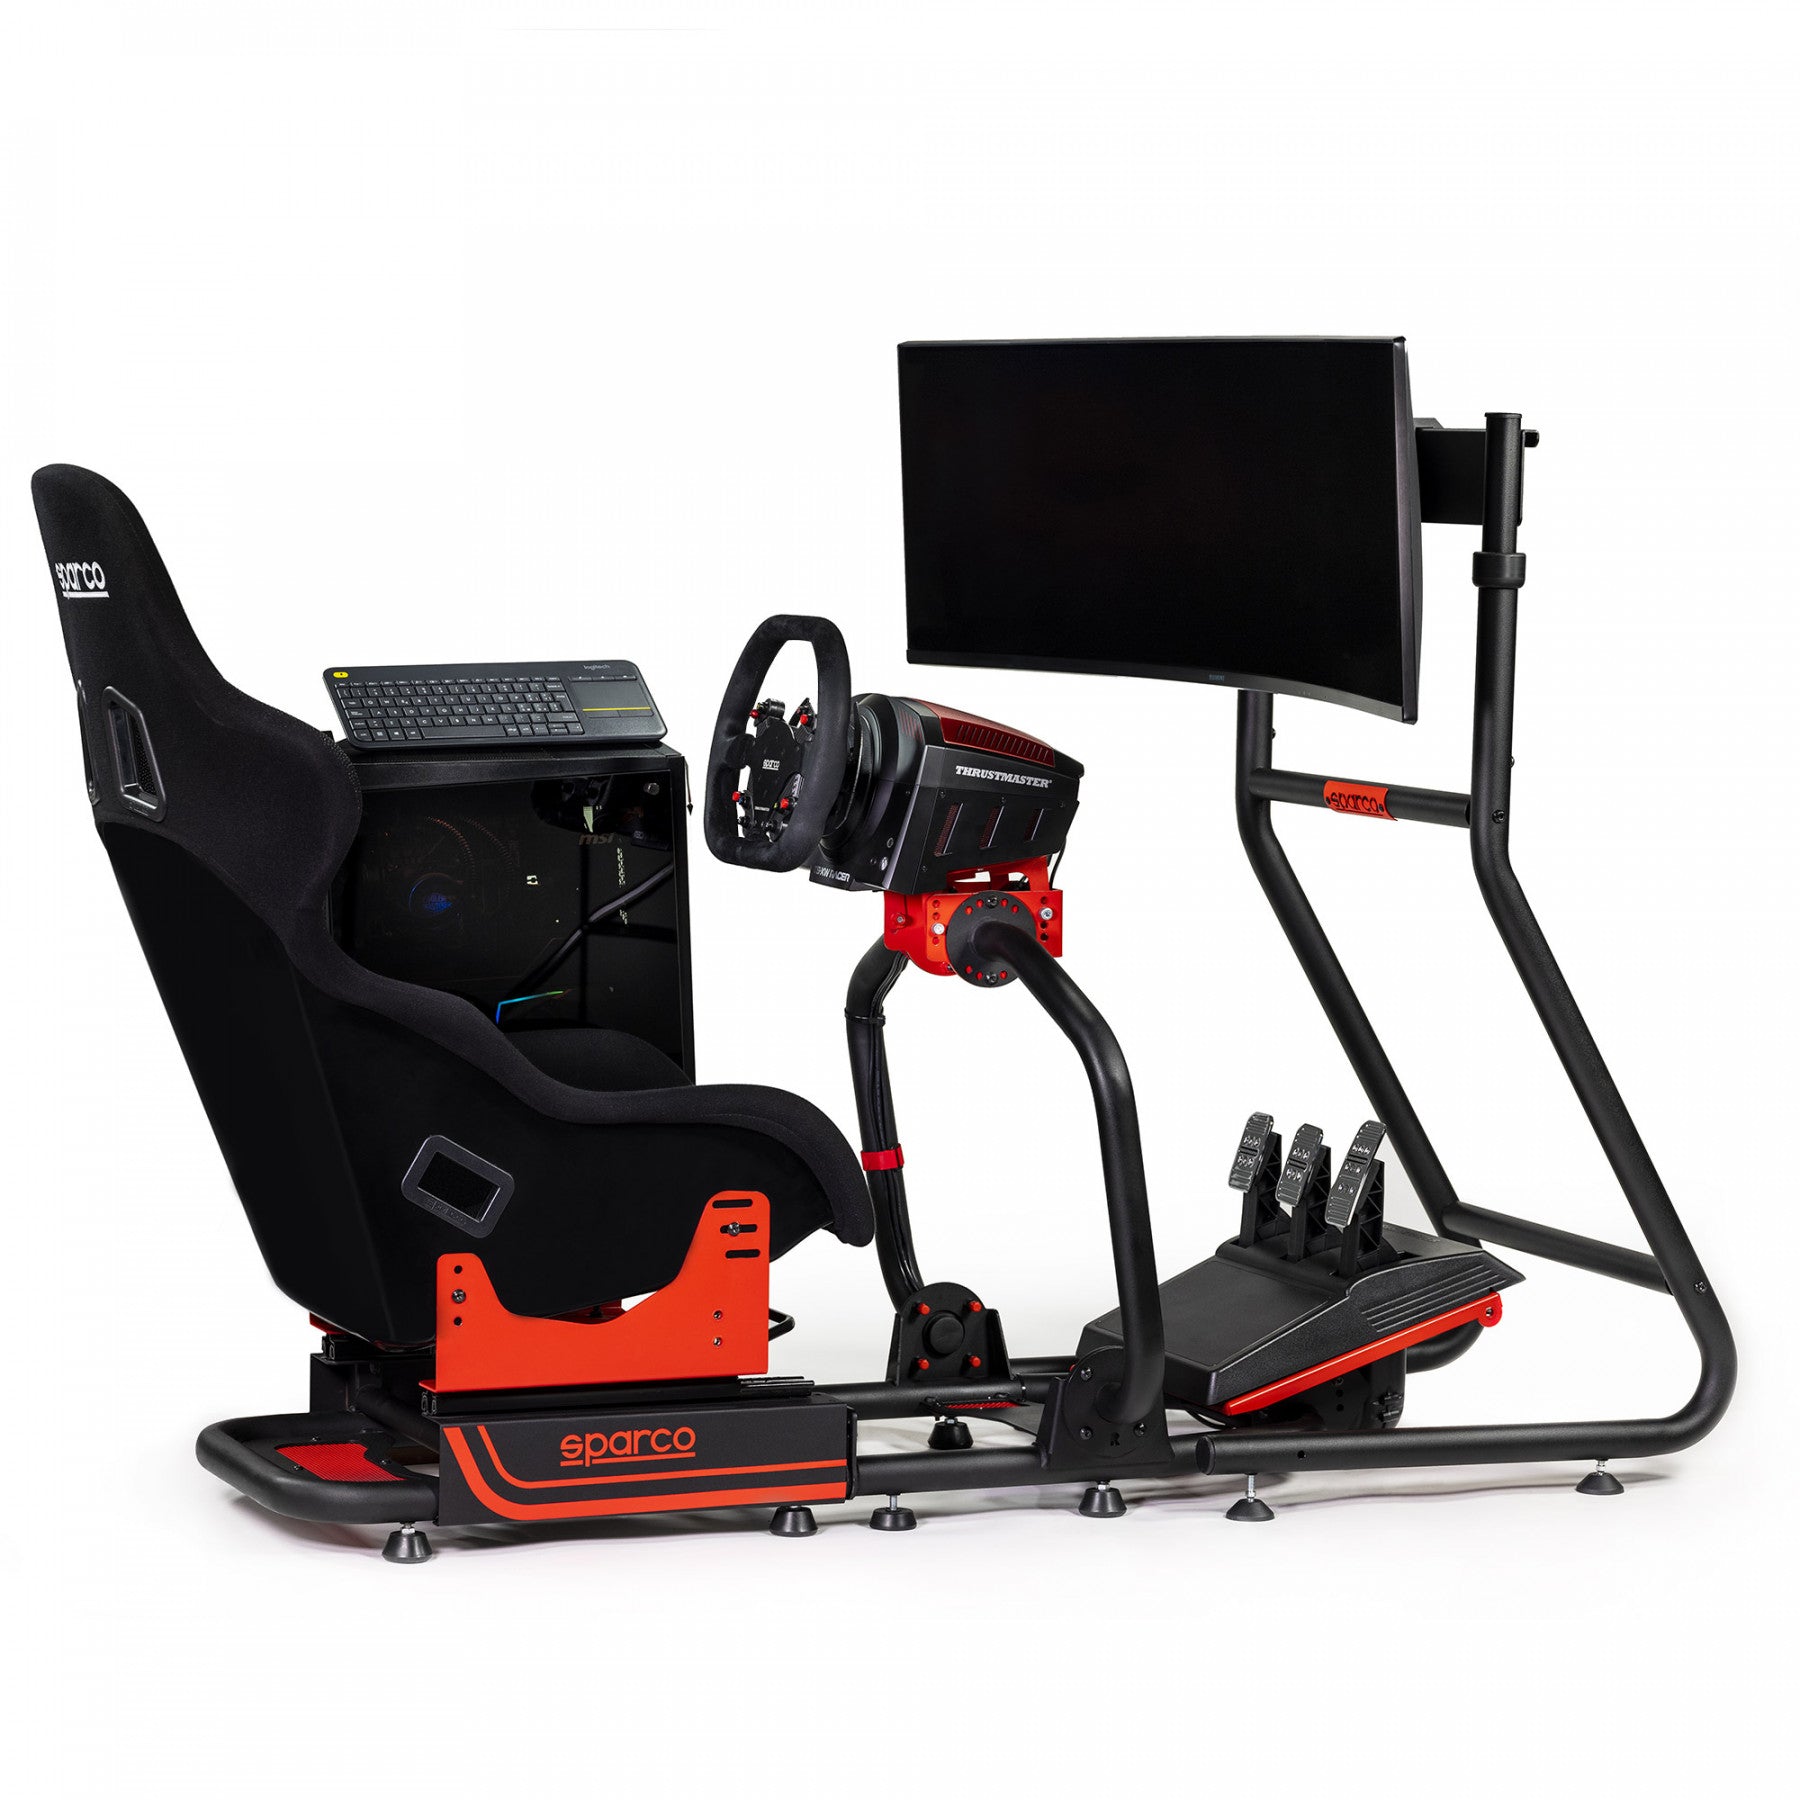 Sparco Sim Rig II – We Don't Lift Racing